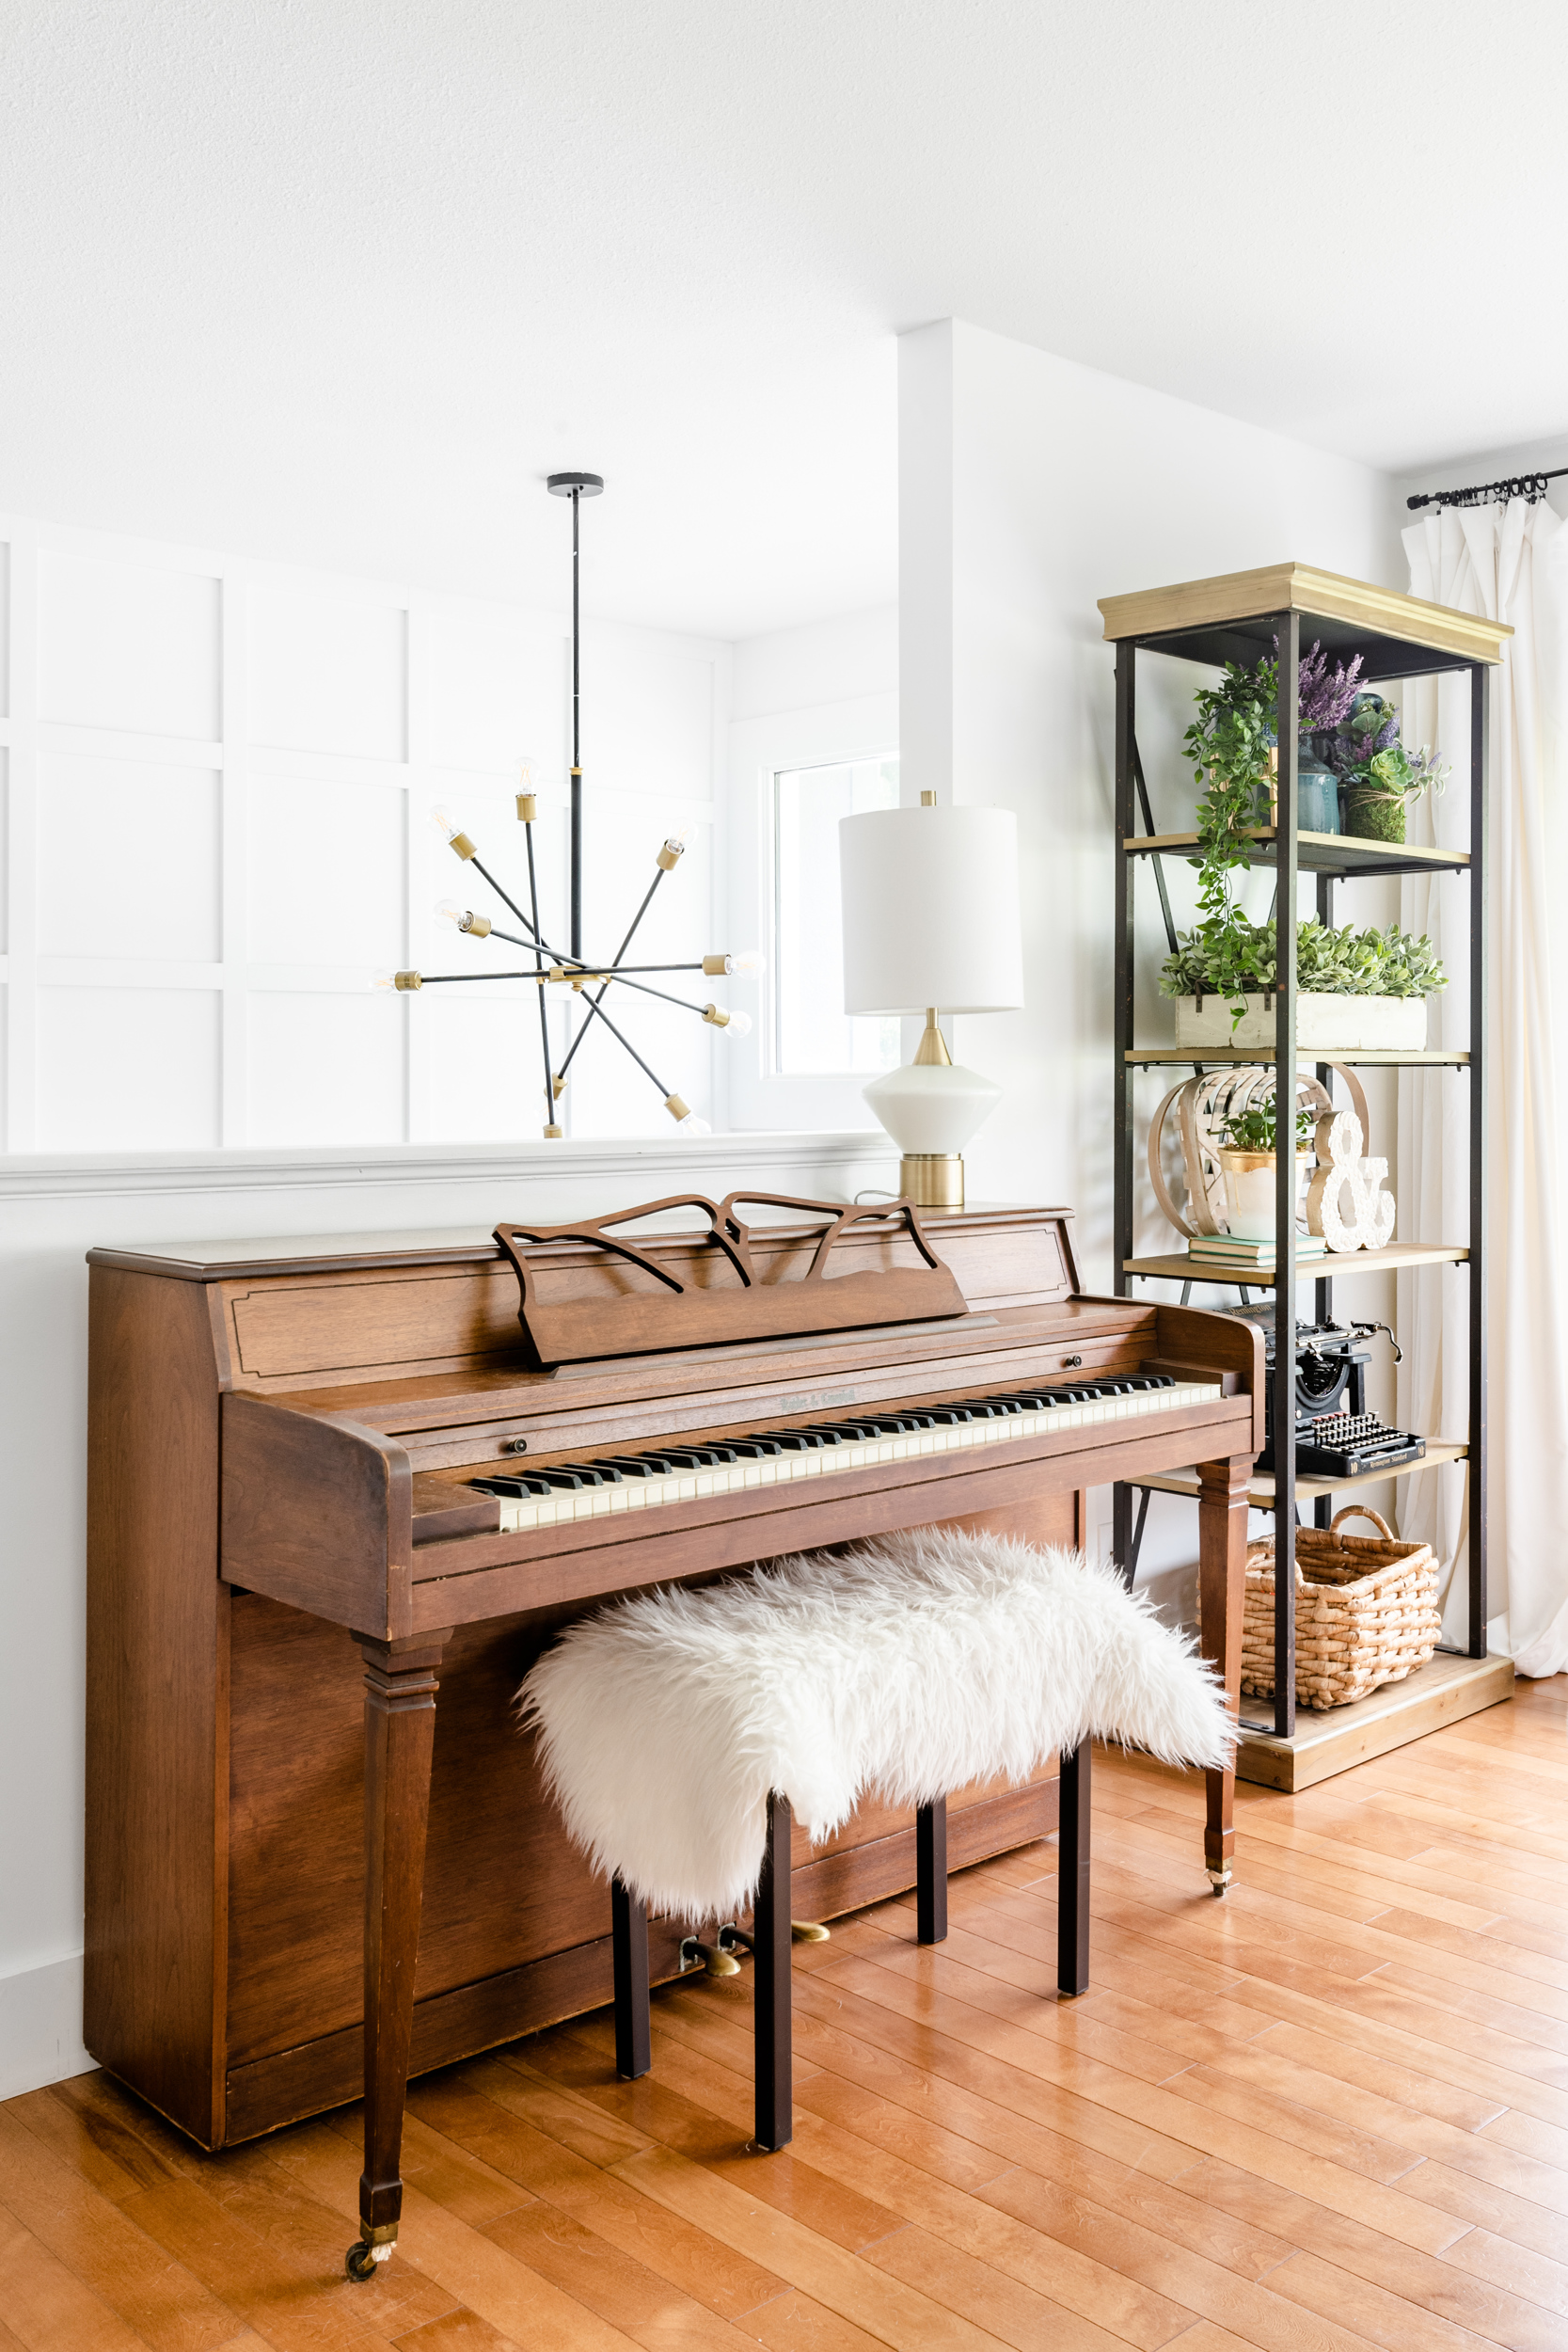 Bright and open living room with a piano and etagere bookcase.